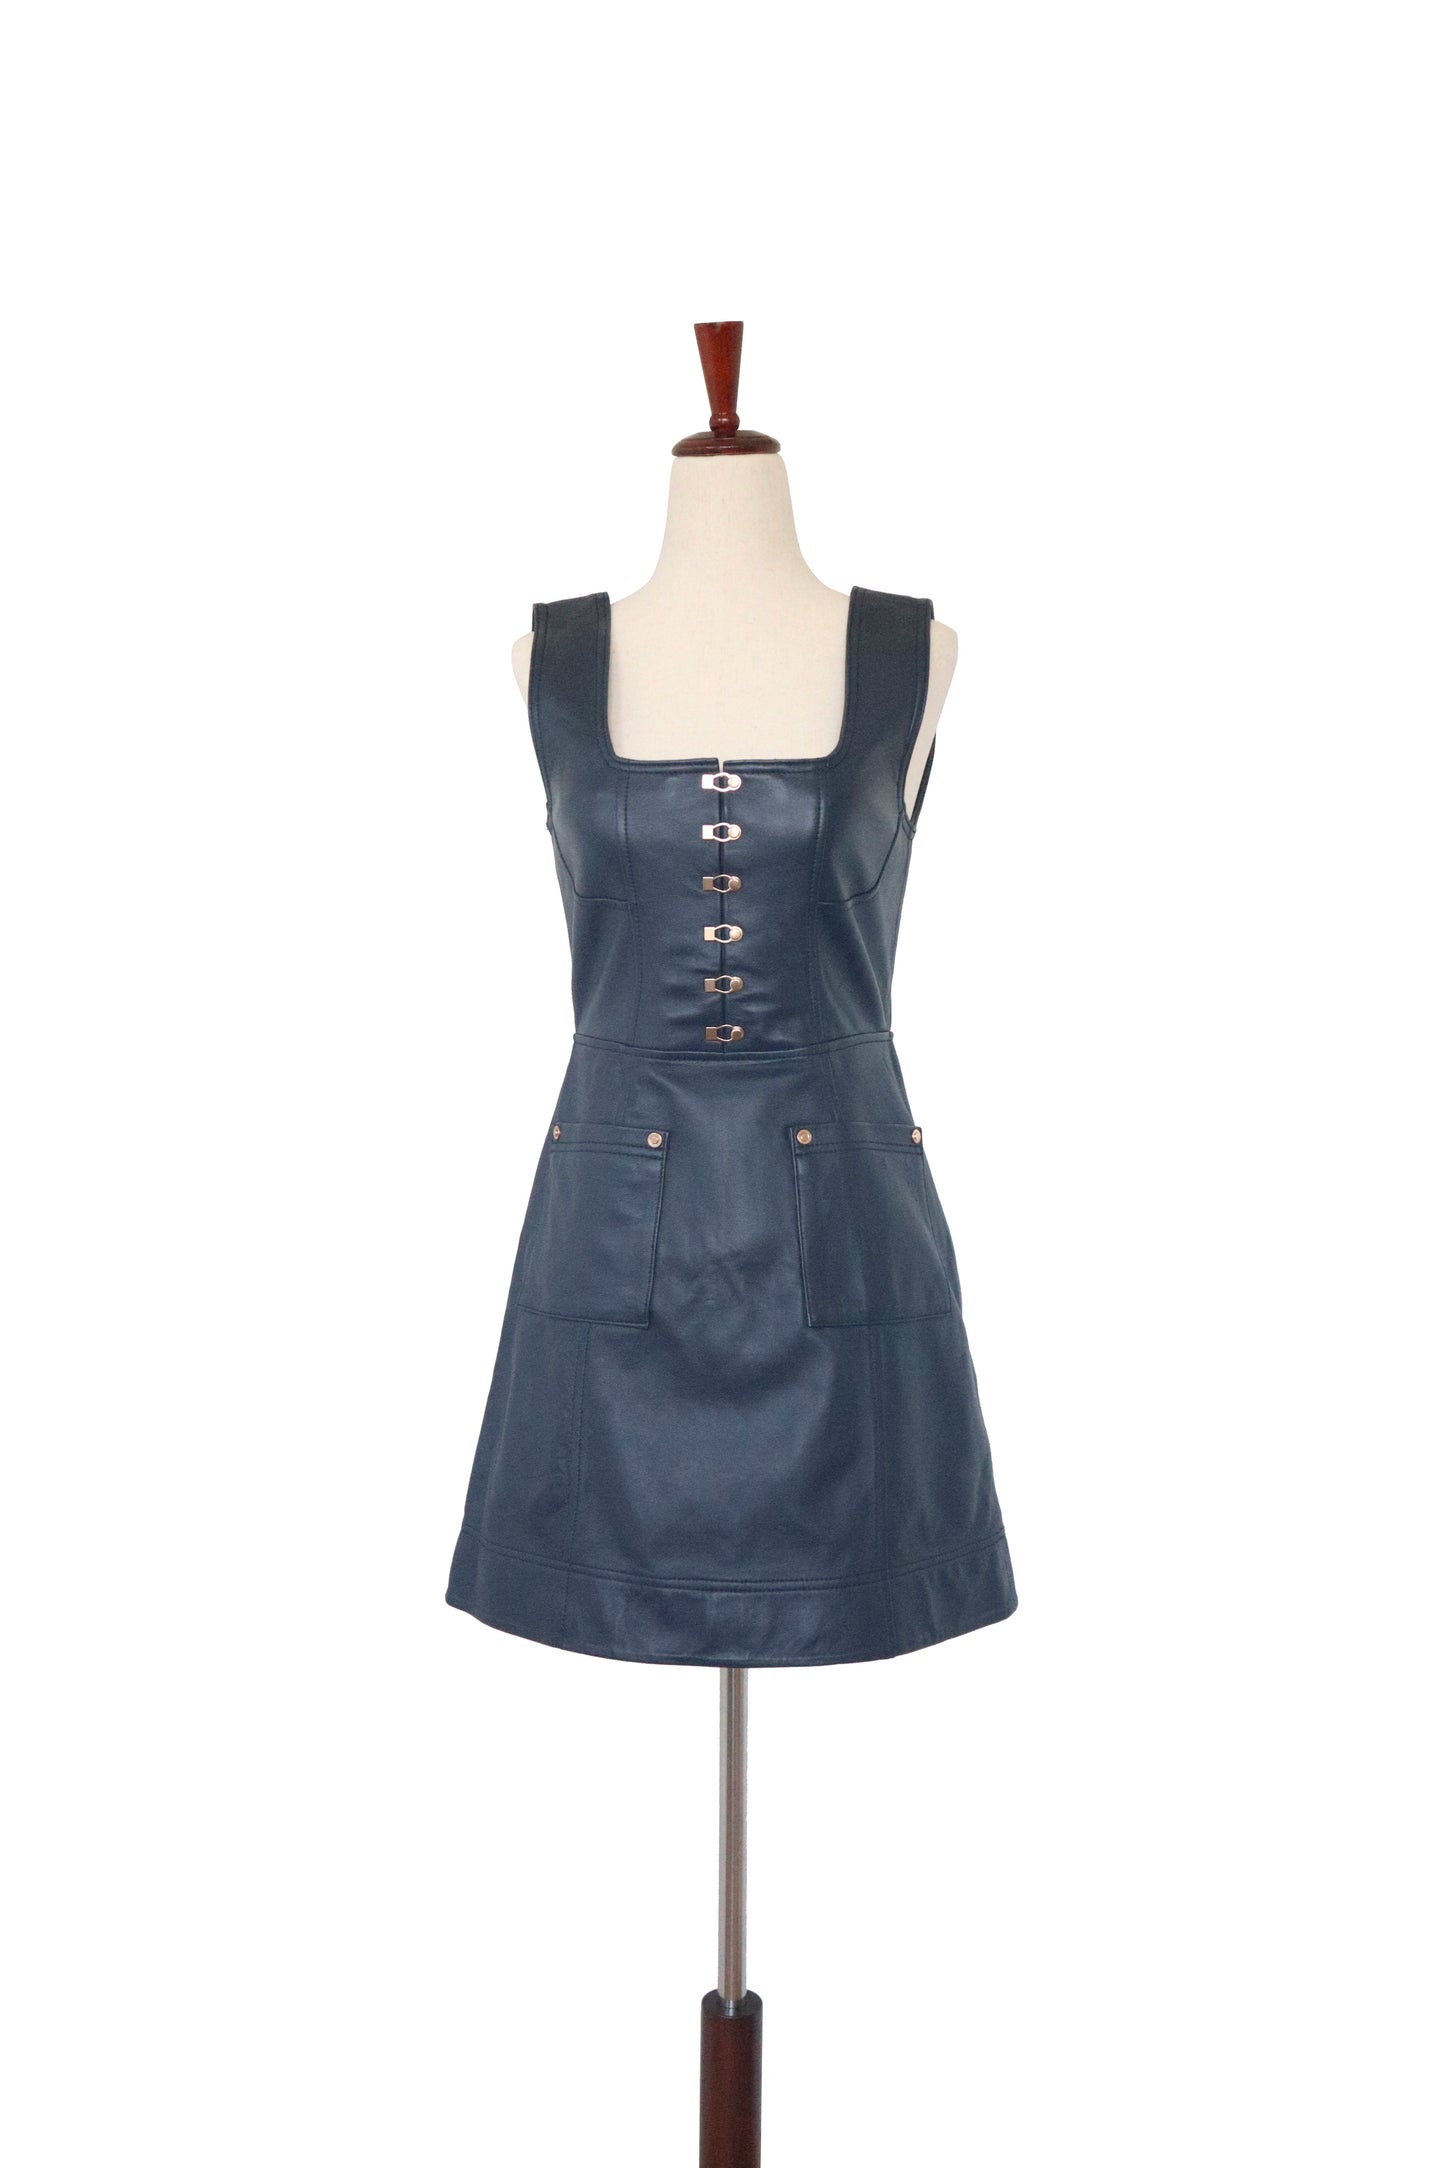 ALICE MCCALL - Navy Leather Dress - US 4